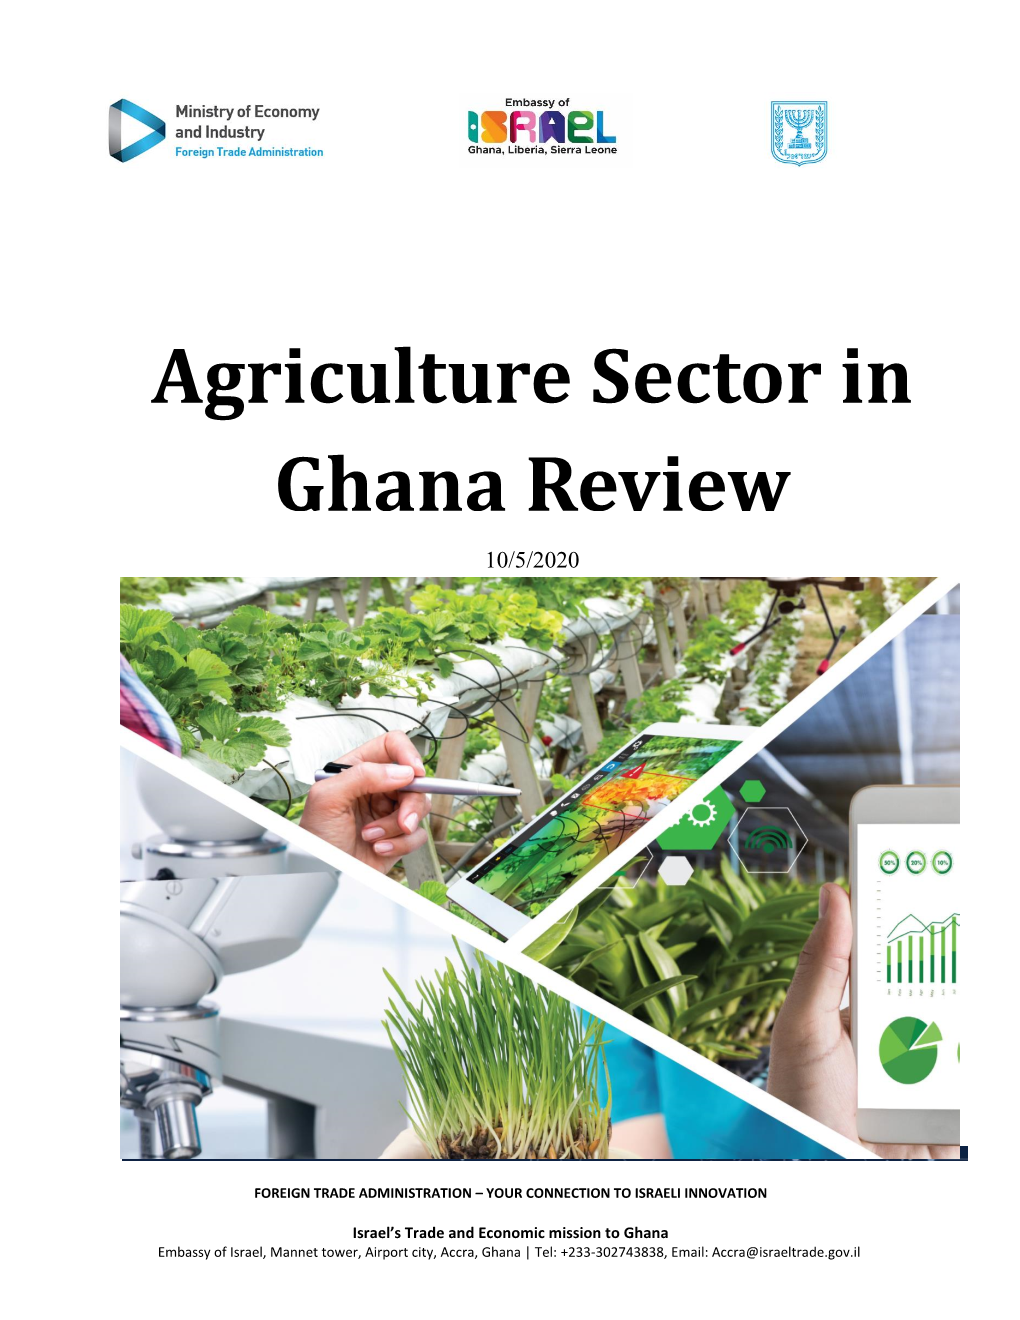 Agriculture Sector in Ghana Review Review